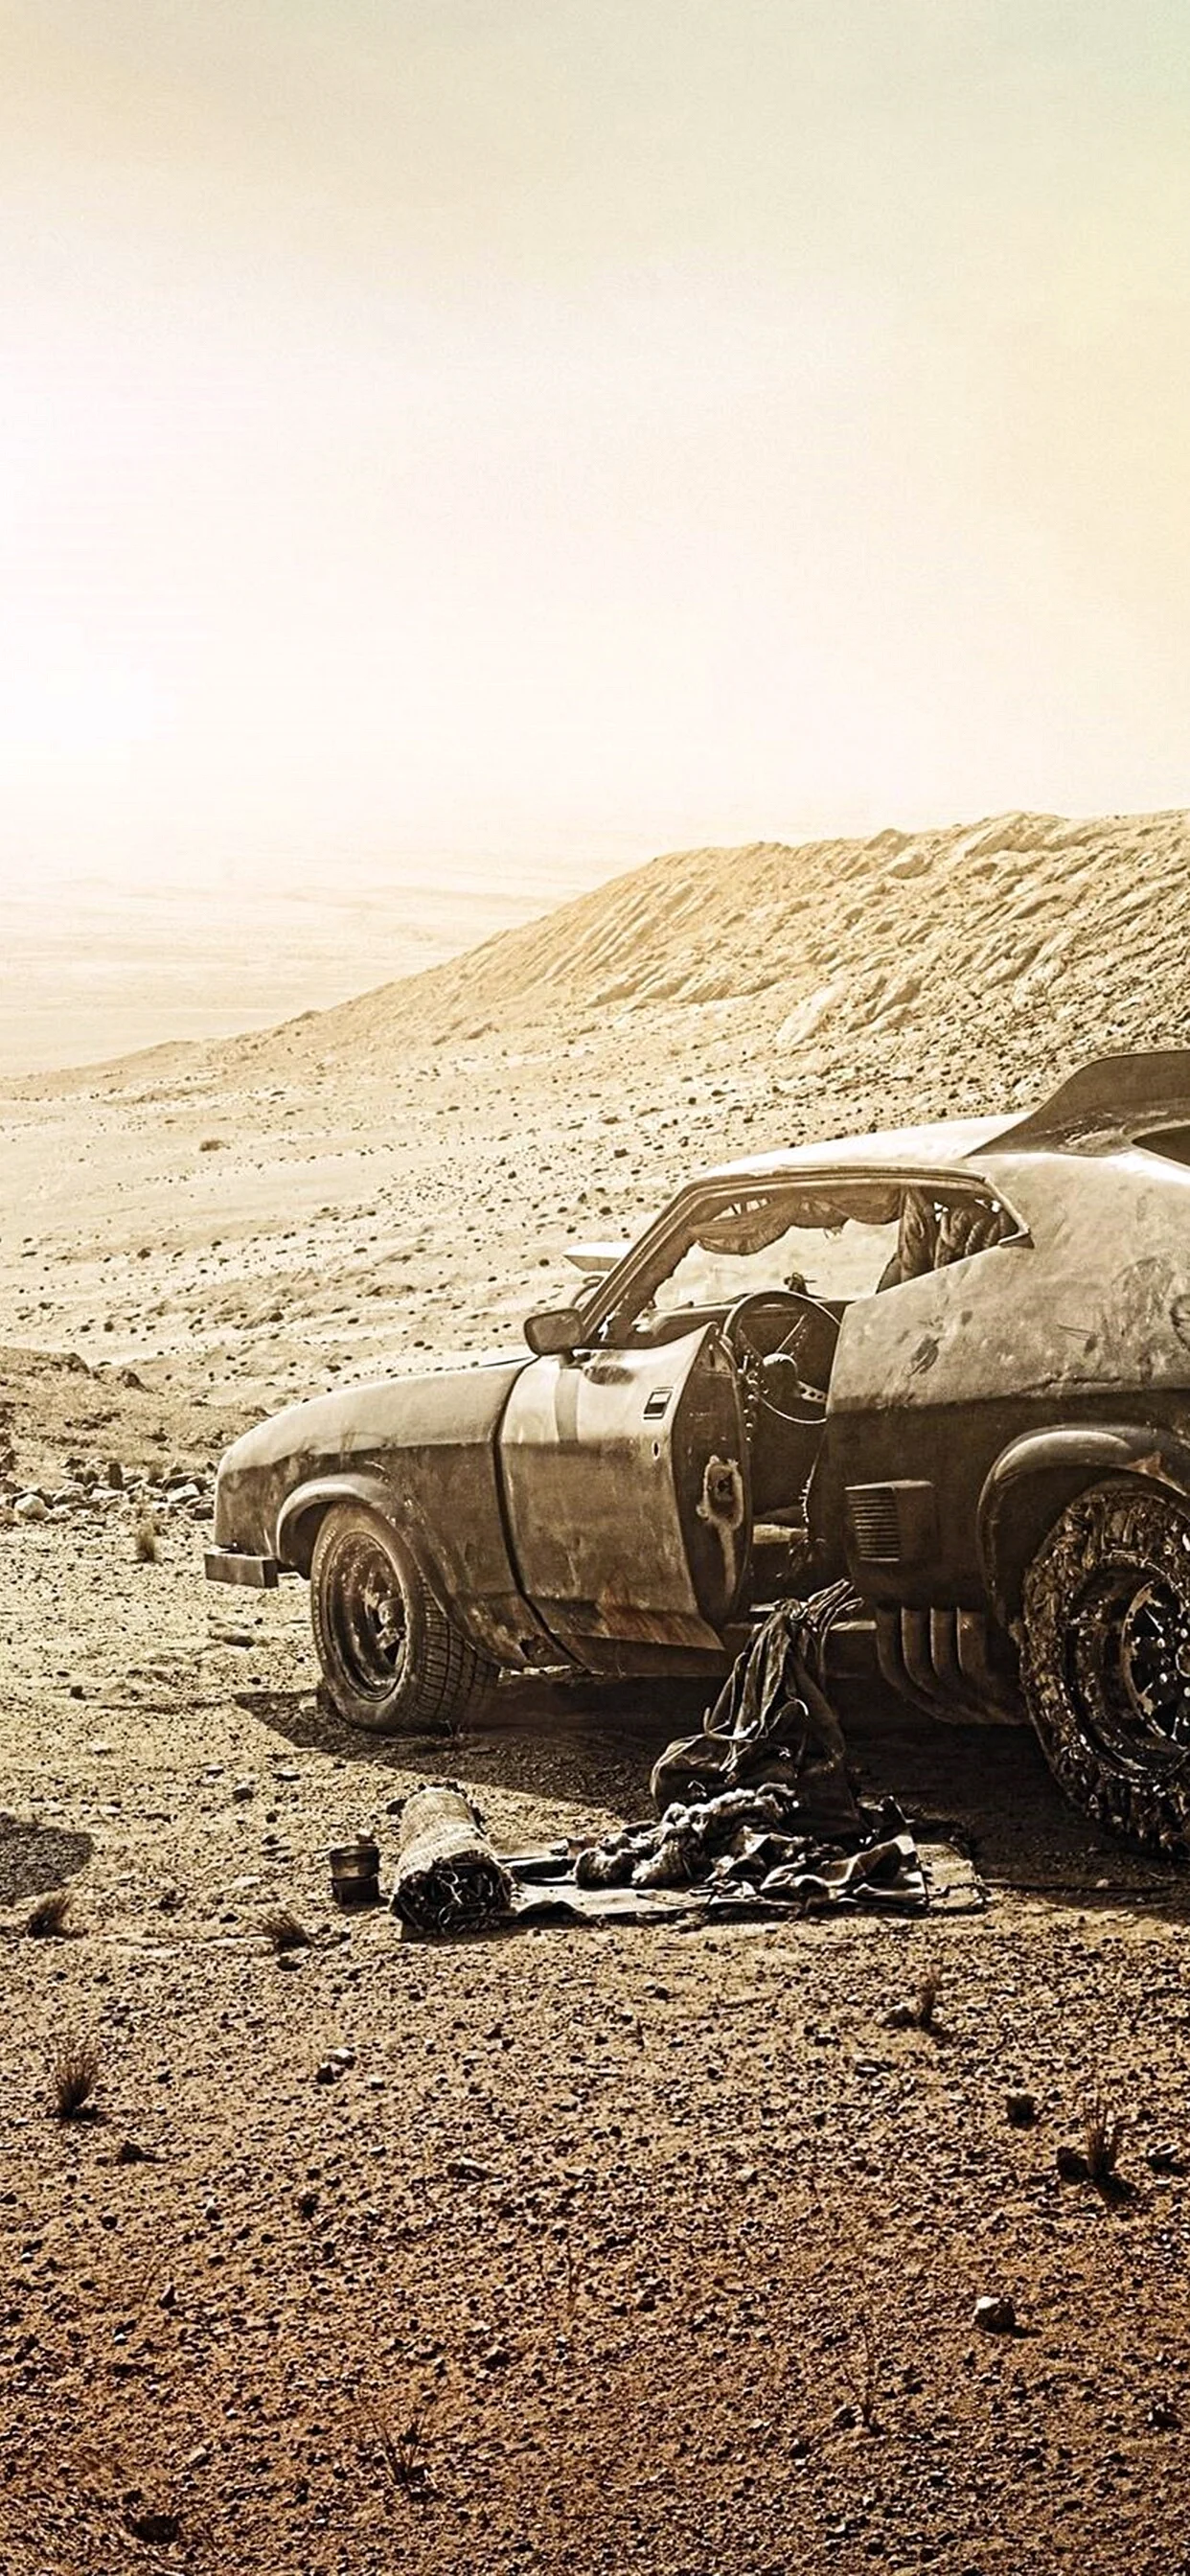 Mad Max Fury Road Wallpaper for iPhone 11 Pro Max